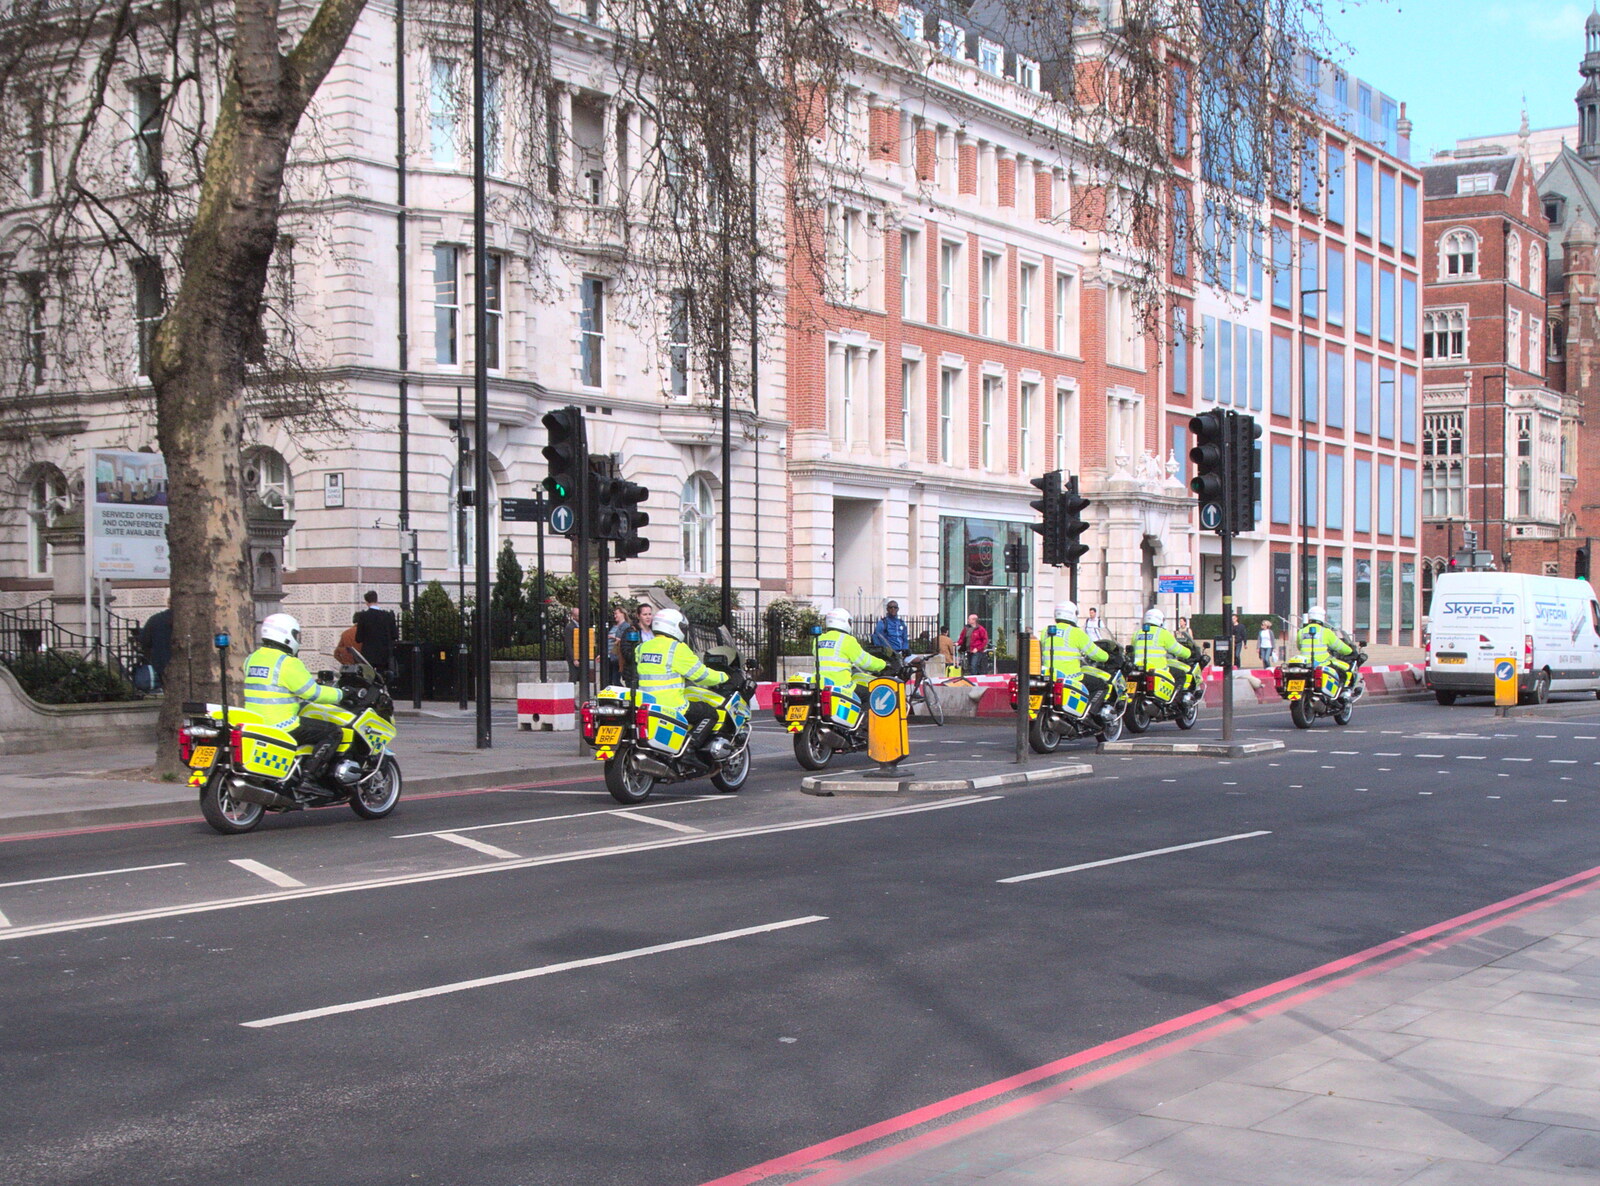 A herd of motorbike rozzers on Embankment from Commonwealth Chaos, and the BSCC at Gissing, London and Norfolk - 18th April 2018